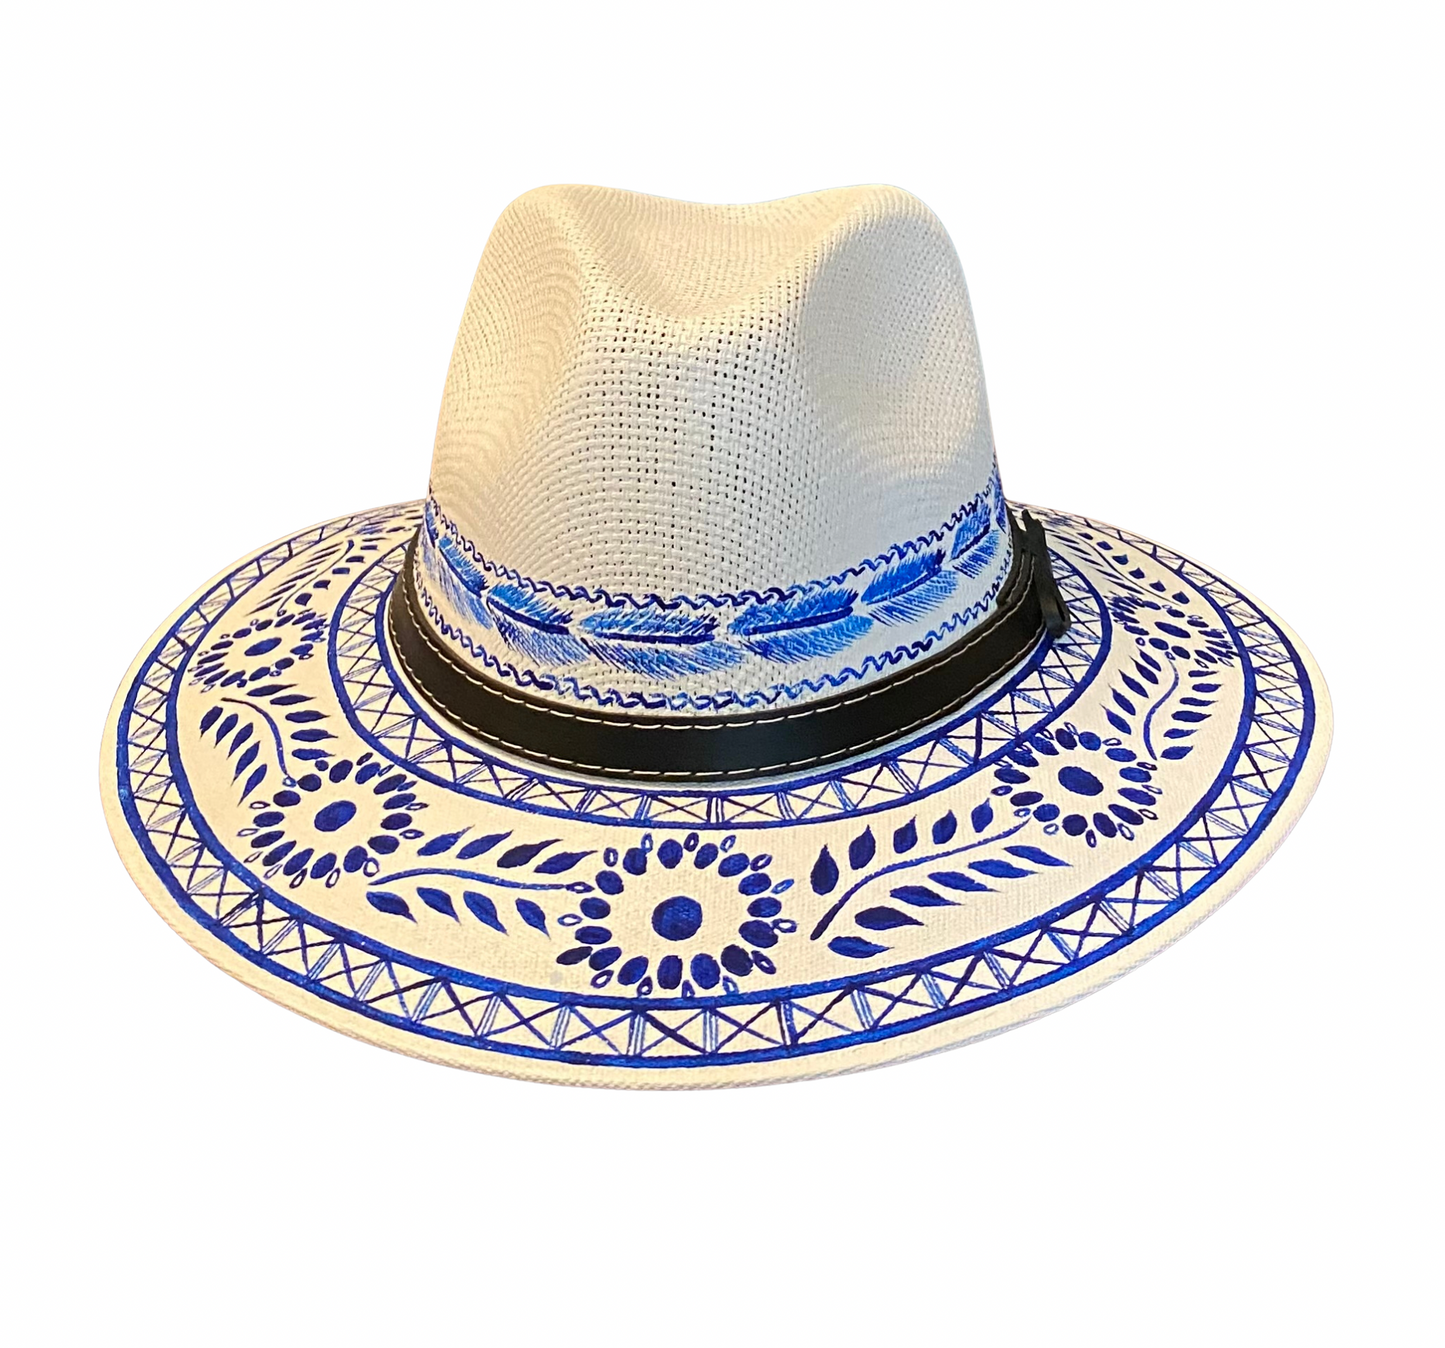 Hand-painted Hat from Mexico - Floral - White, Navy